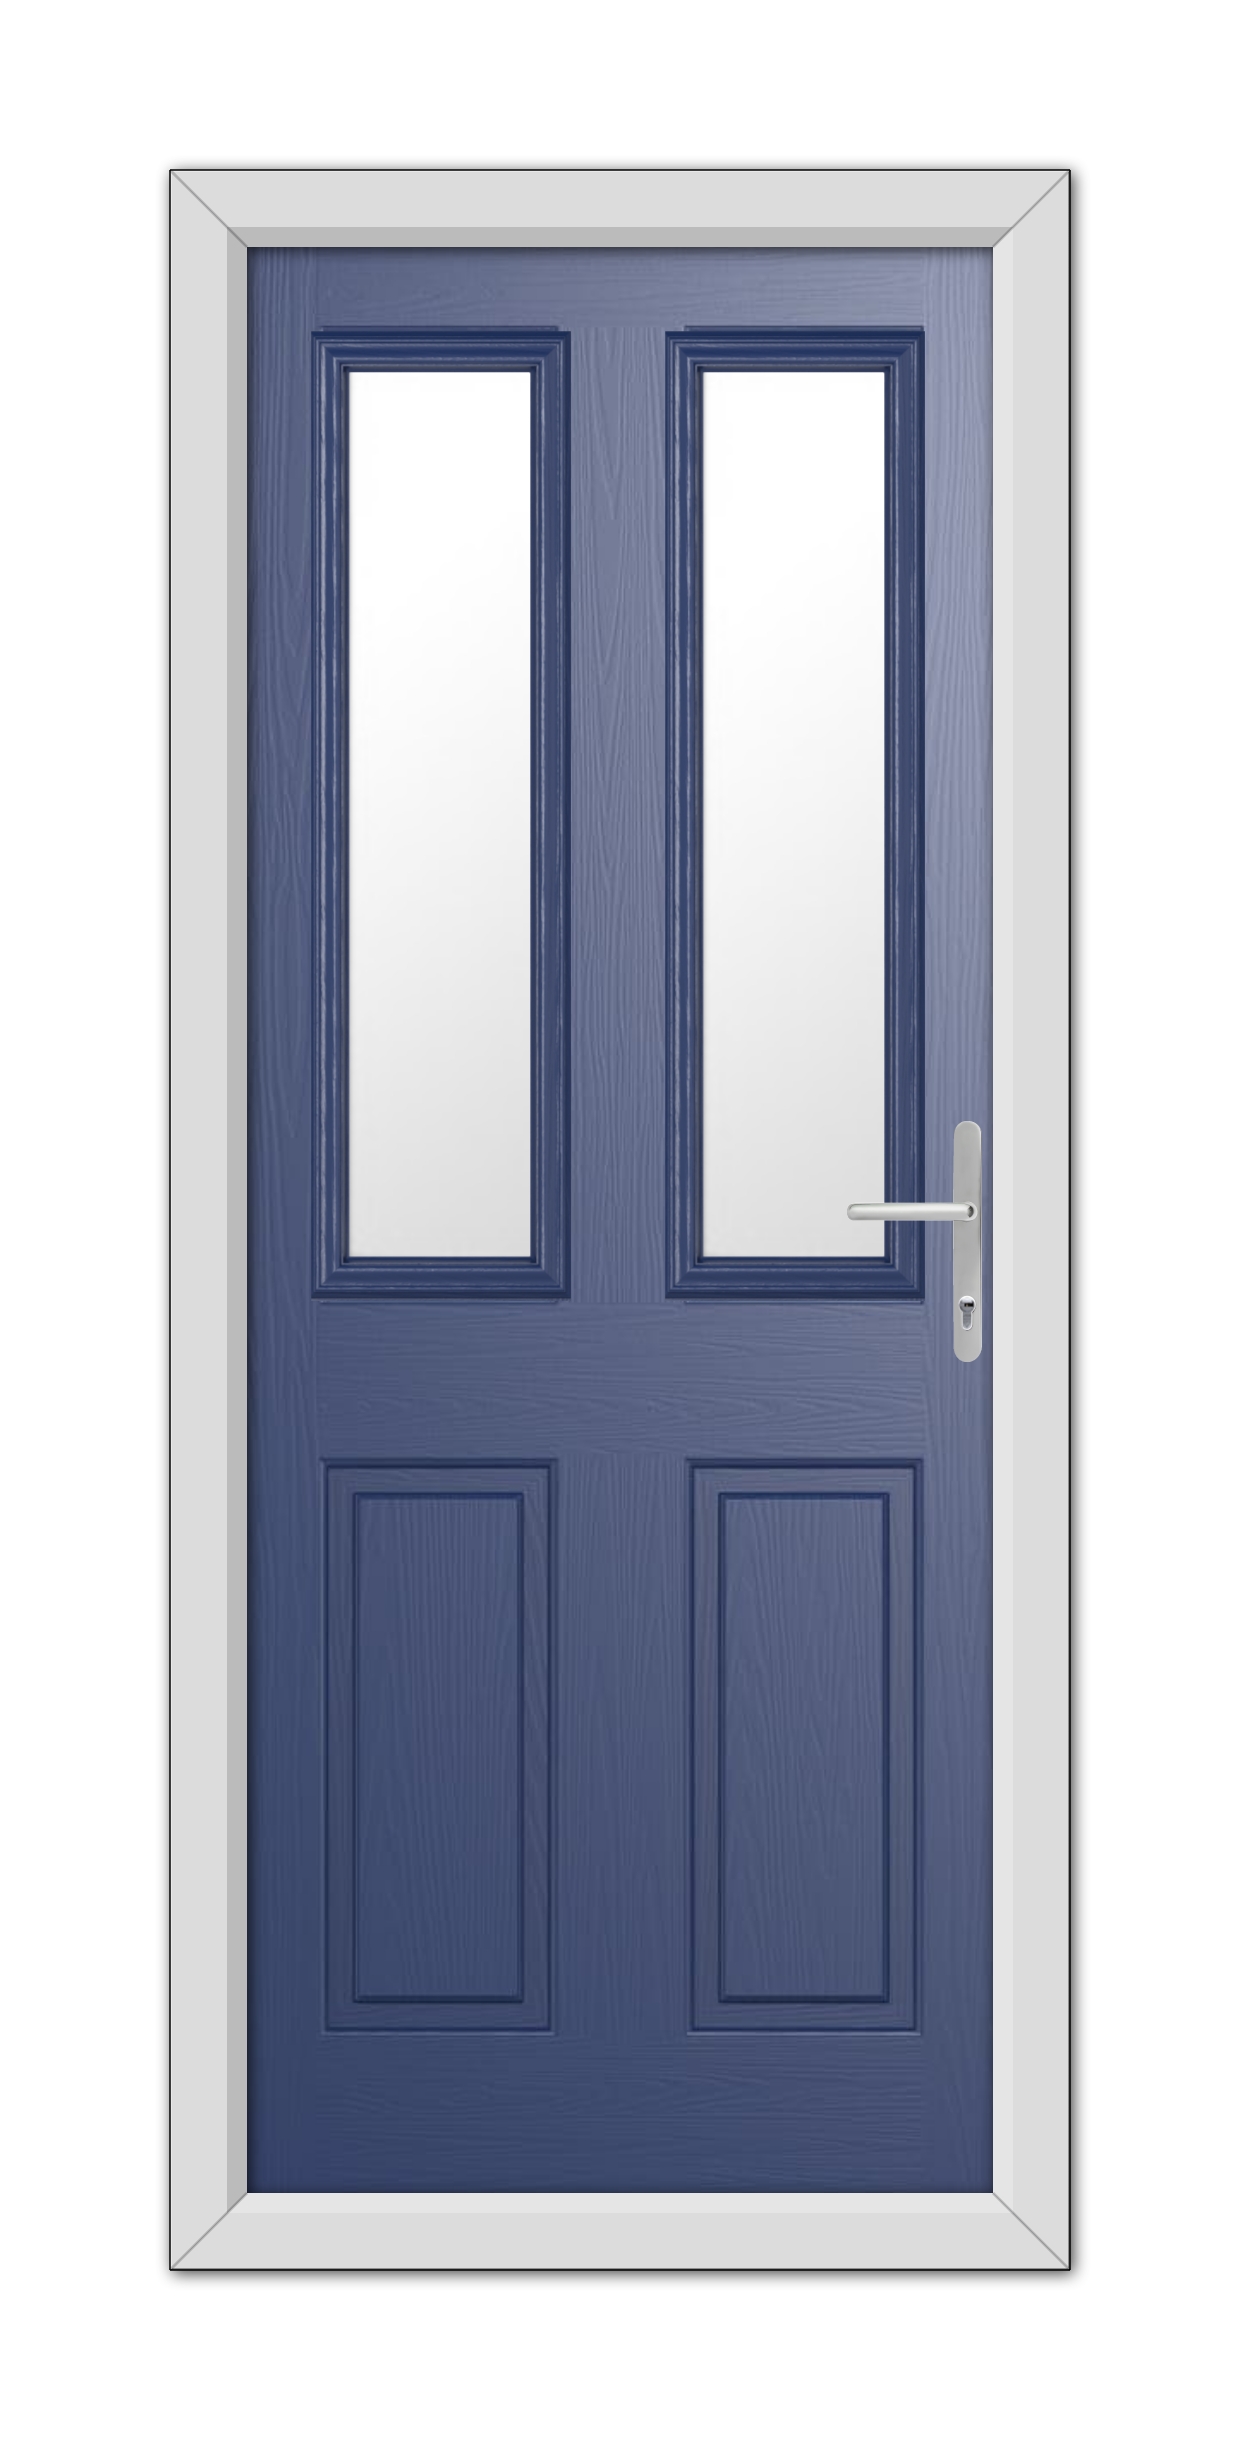 Double Blue Whitmore Composite Doors with rectangular windows and a modern white handle, set within a white frame, isolated on a white background.